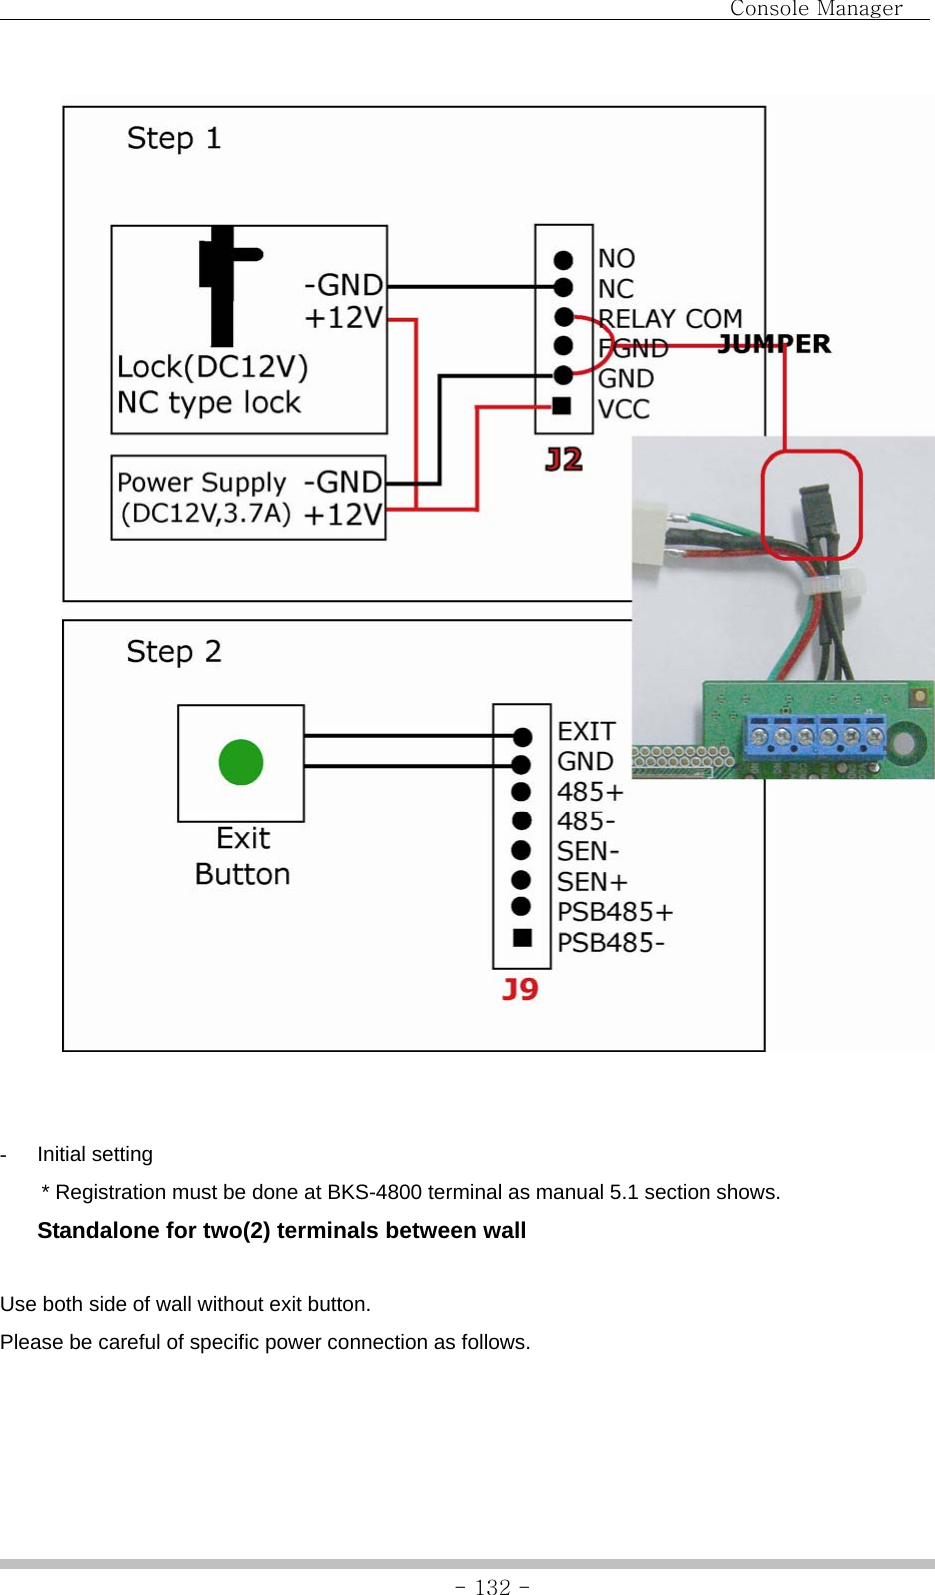                                Console Manager               - 132 -   - Initial setting  * Registration must be done at BKS-4800 terminal as manual 5.1 section shows.   Standalone for two(2) terminals between wall  Use both side of wall without exit button. Please be careful of specific power connection as follows.   